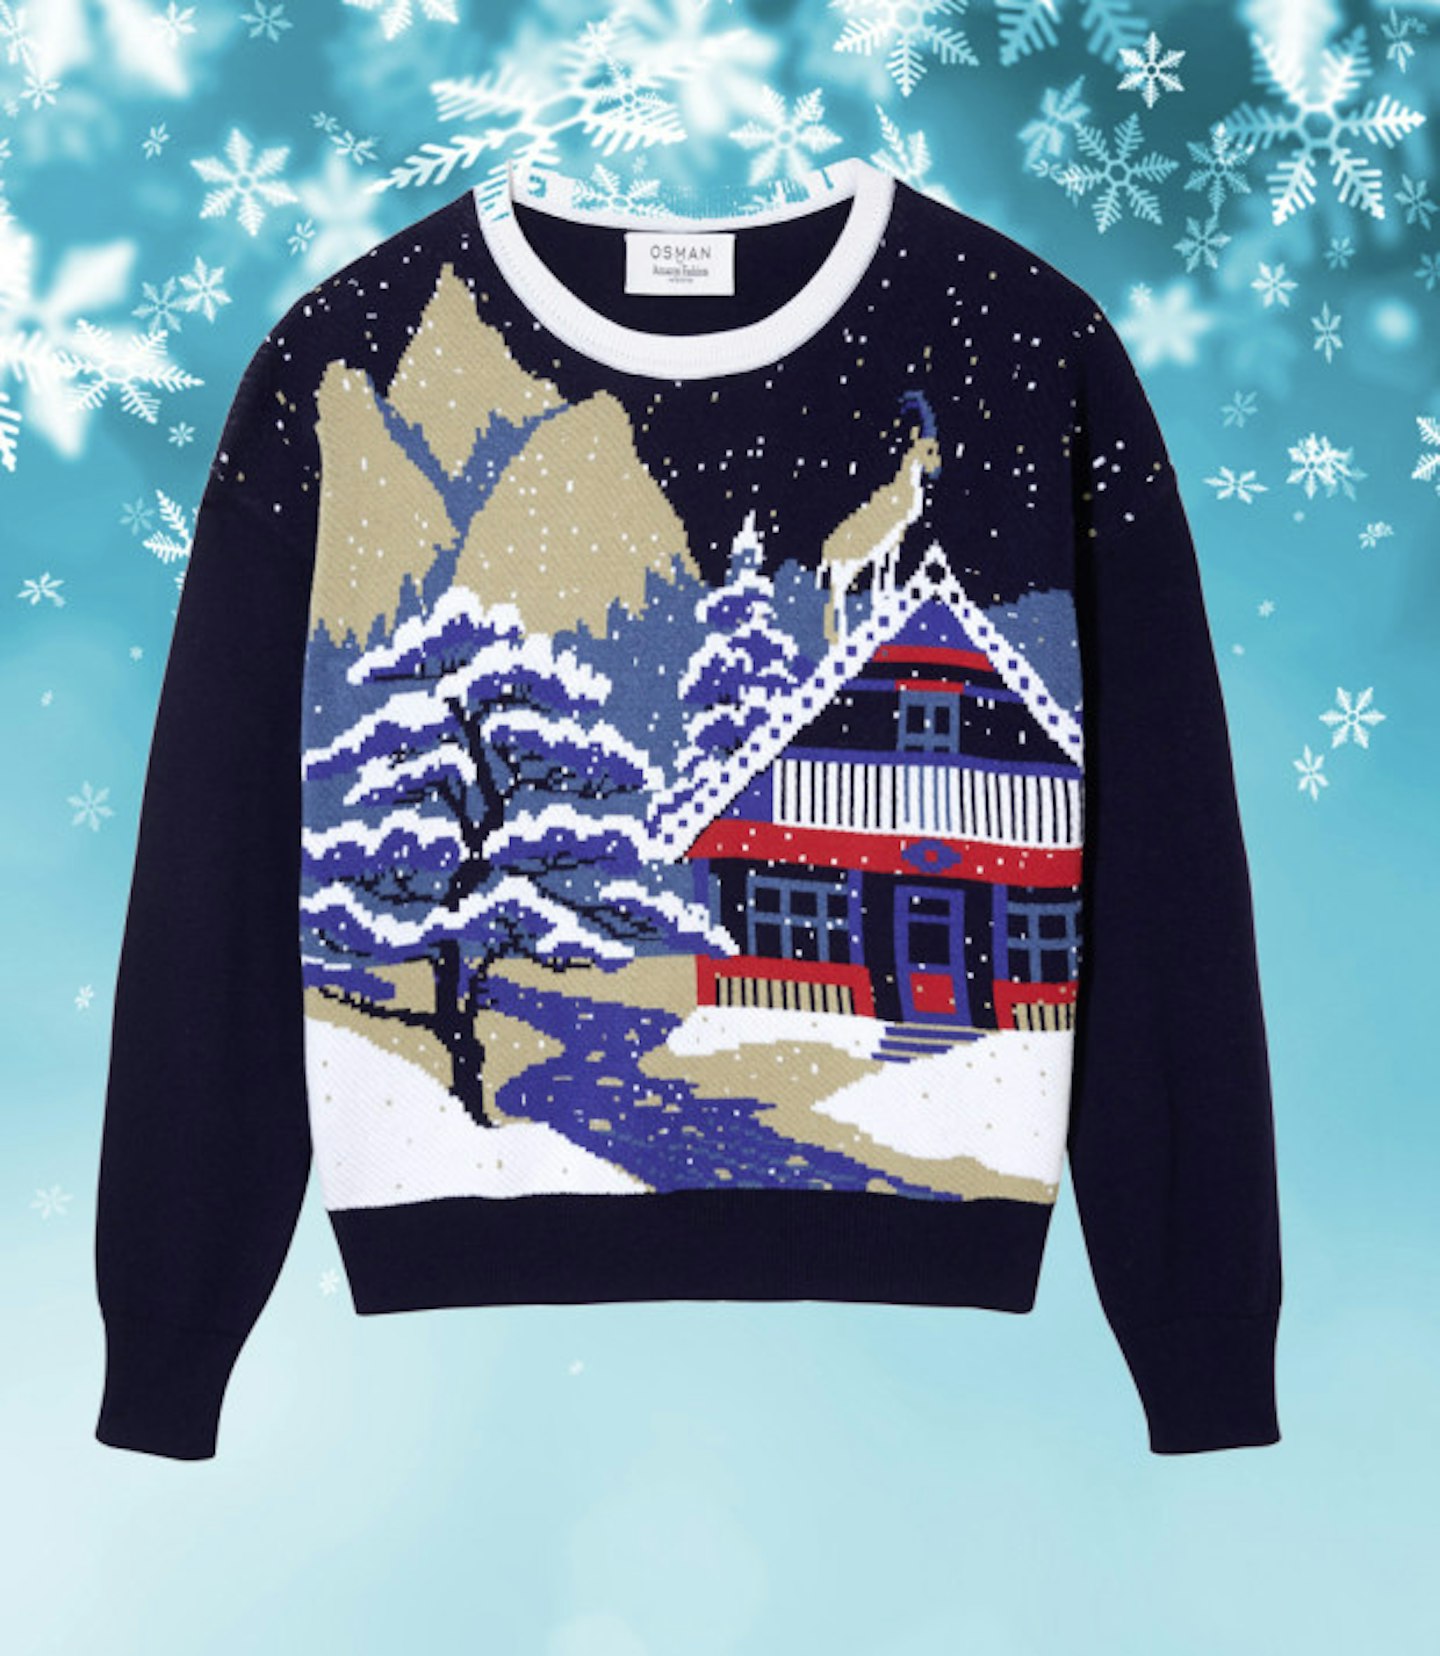 23 of the Best Christmas Jumpers for Kids to Buy Now - Little London